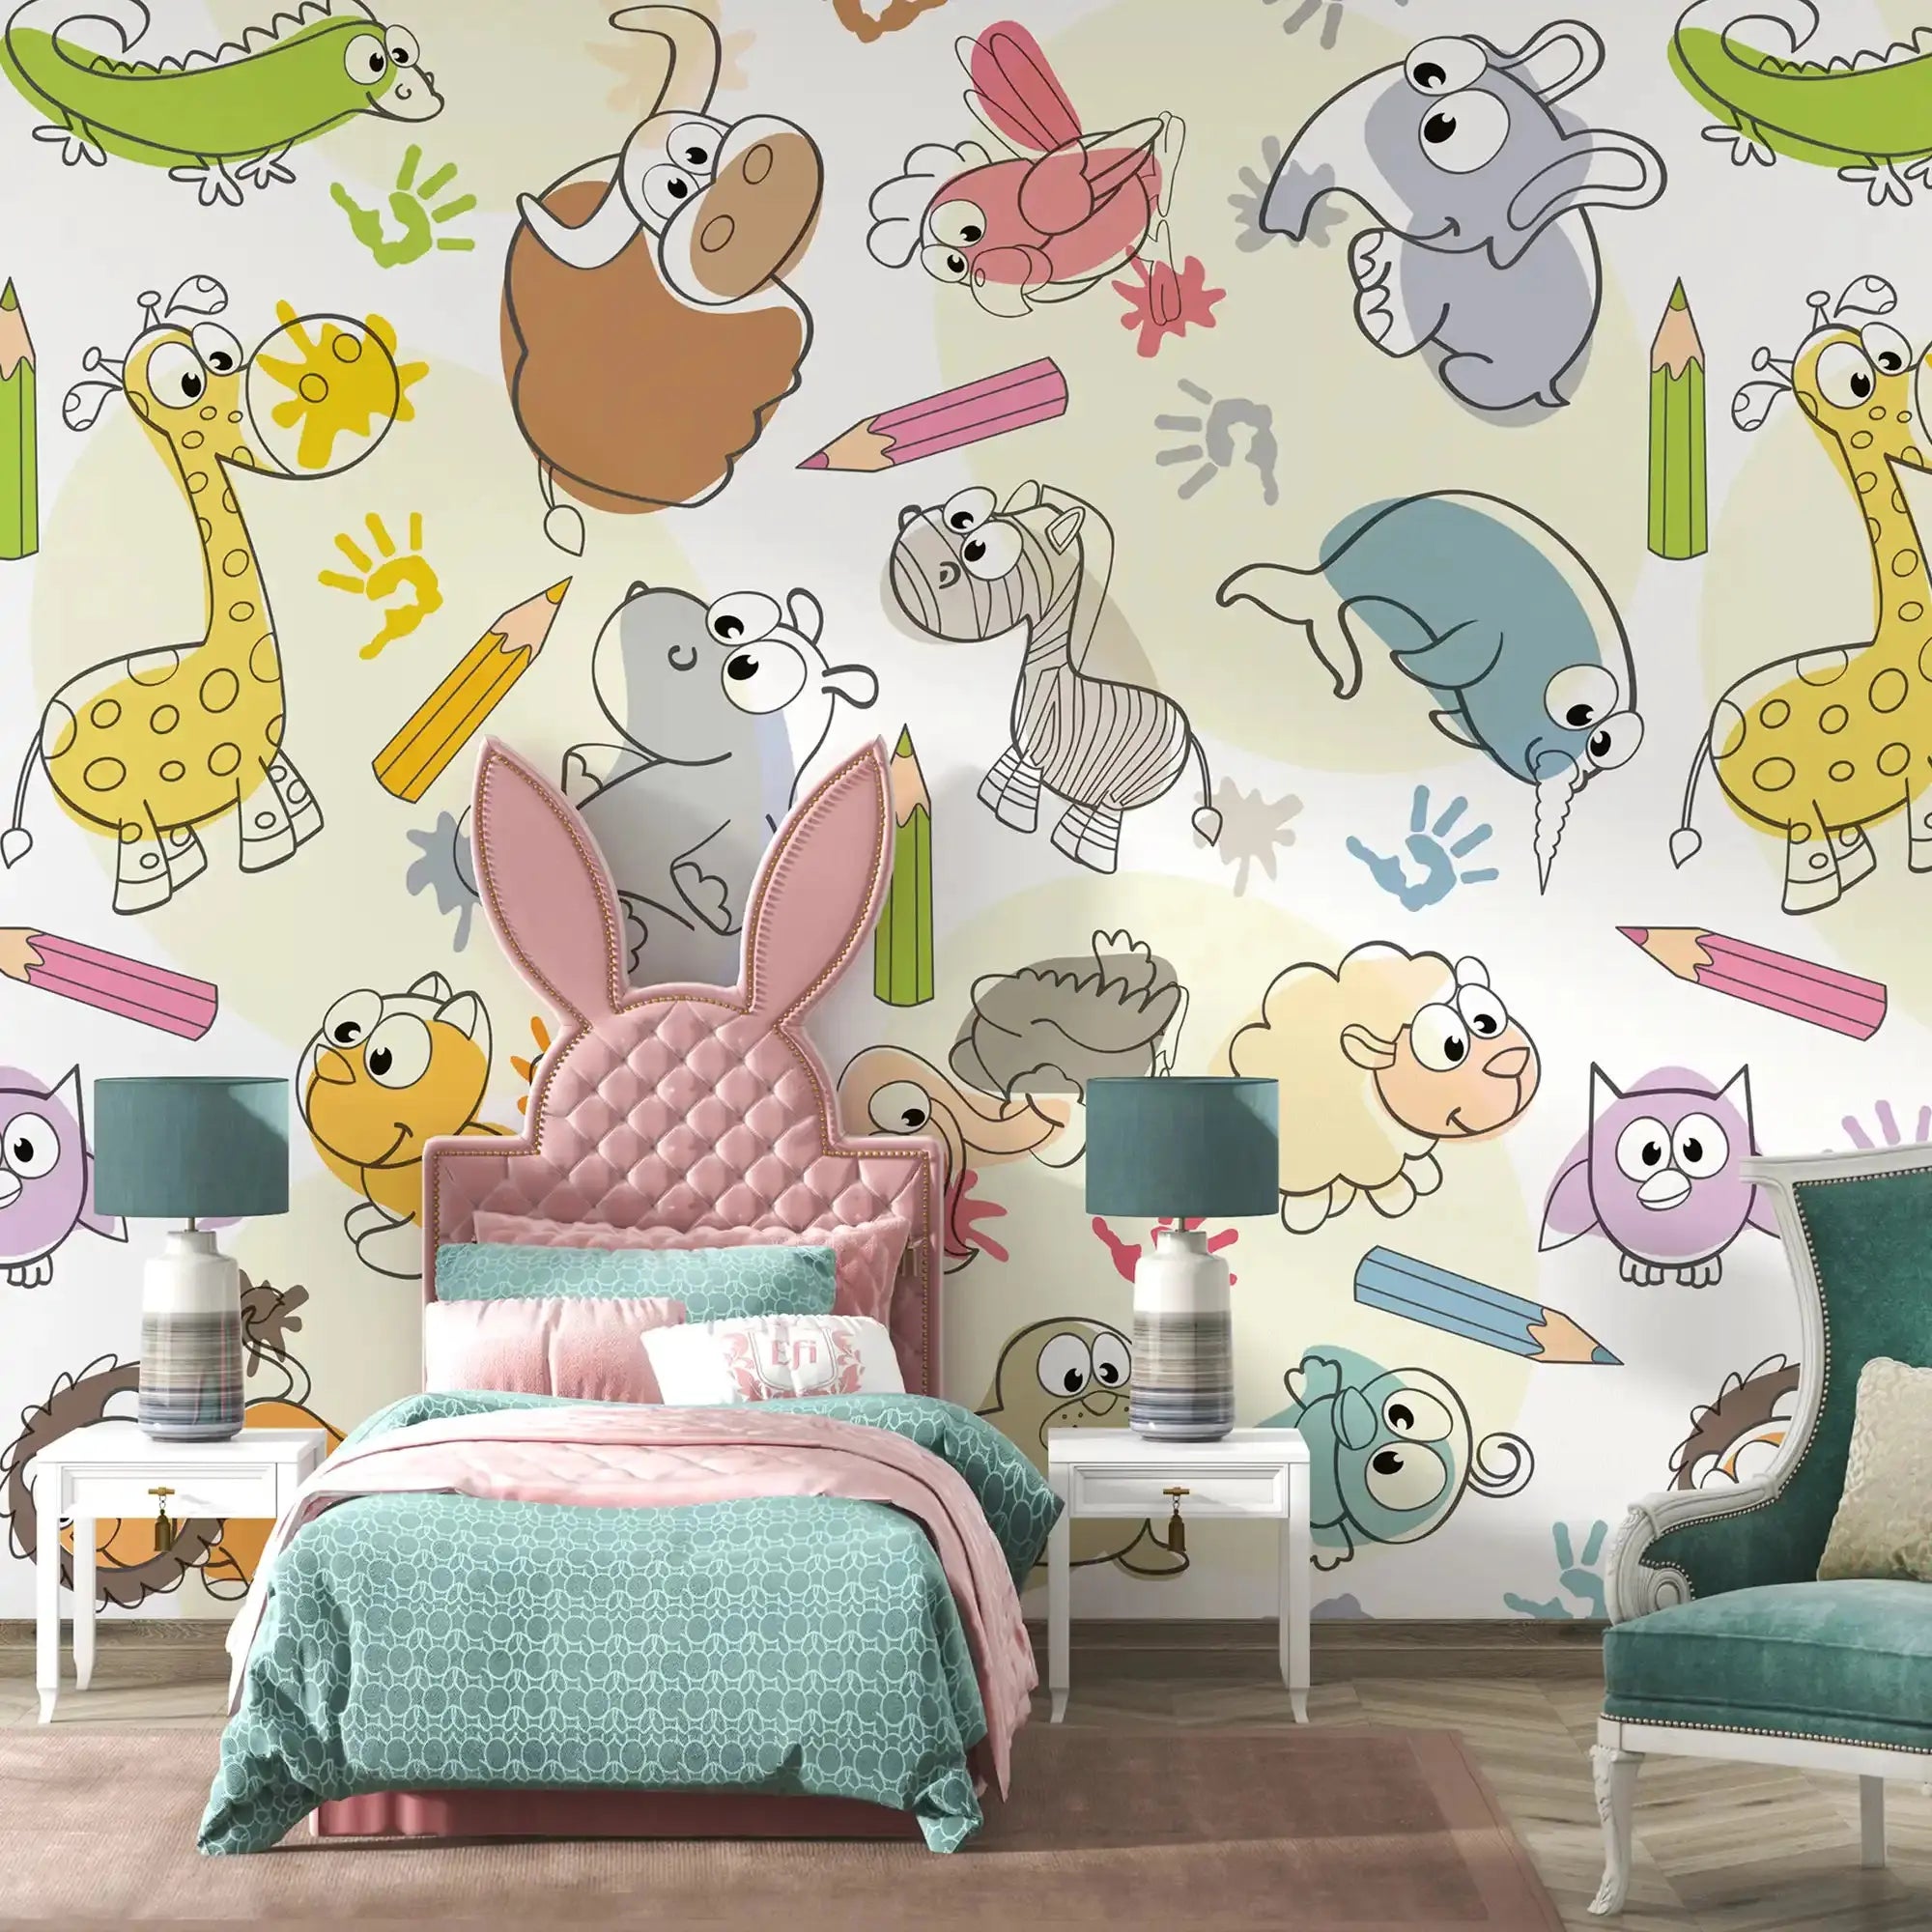 6003 / Colorful Animal Pattern - Peel and Stick Wallpaper for Nursery Decor and Kids Room - Artevella